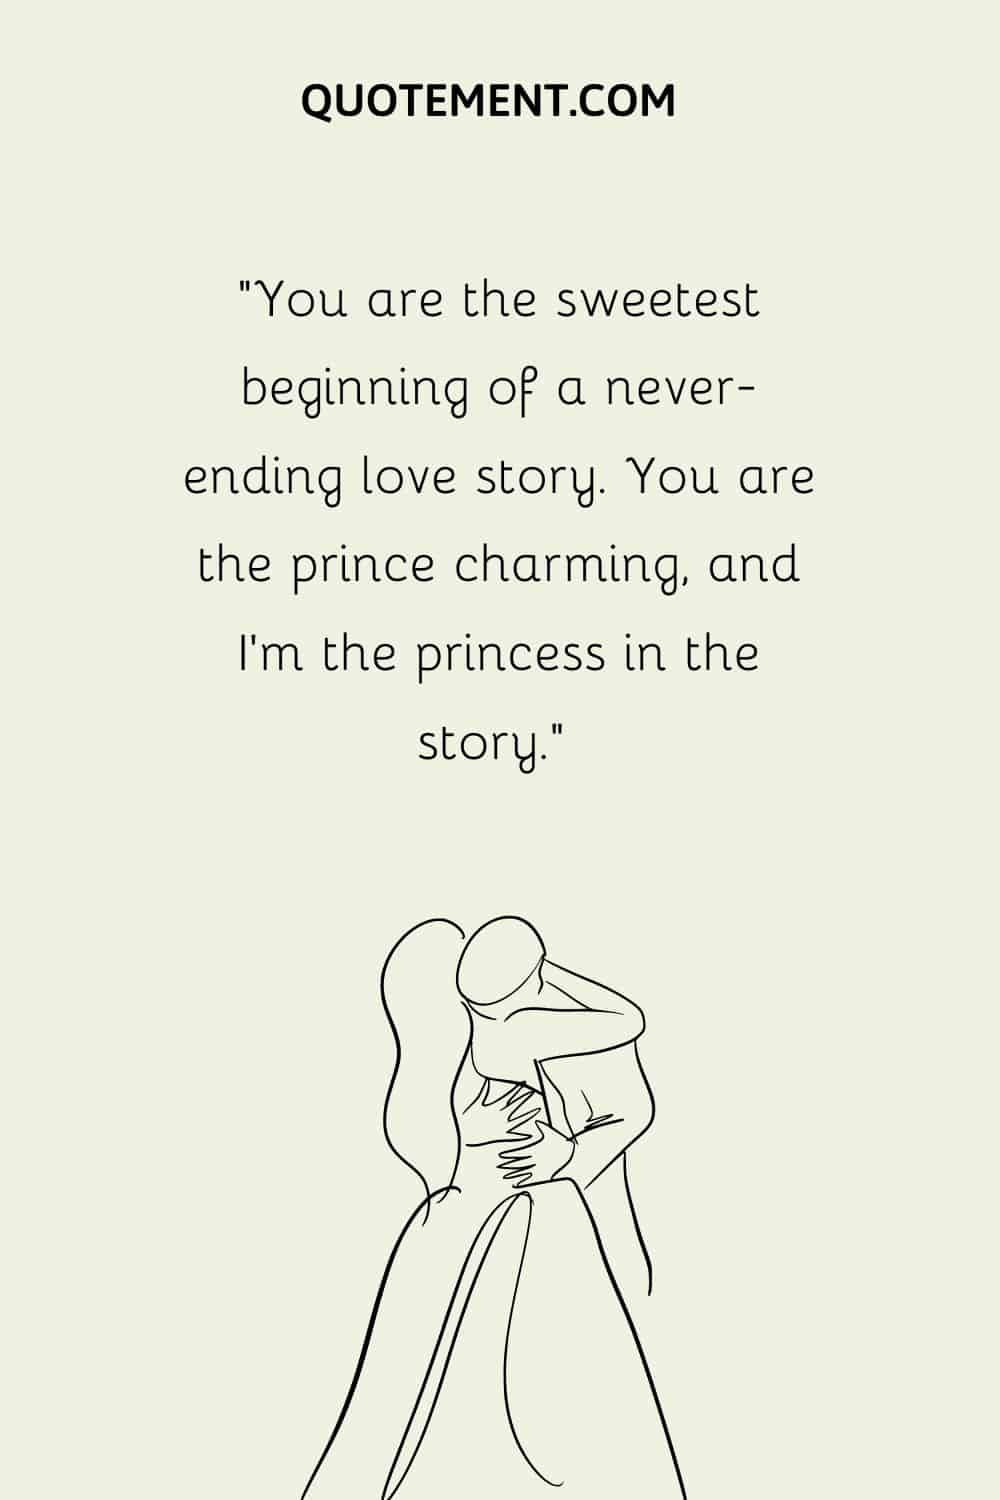 “You are the sweetest beginning of a never-ending love story. You are the prince charming, and I’m the princess in the story.” 